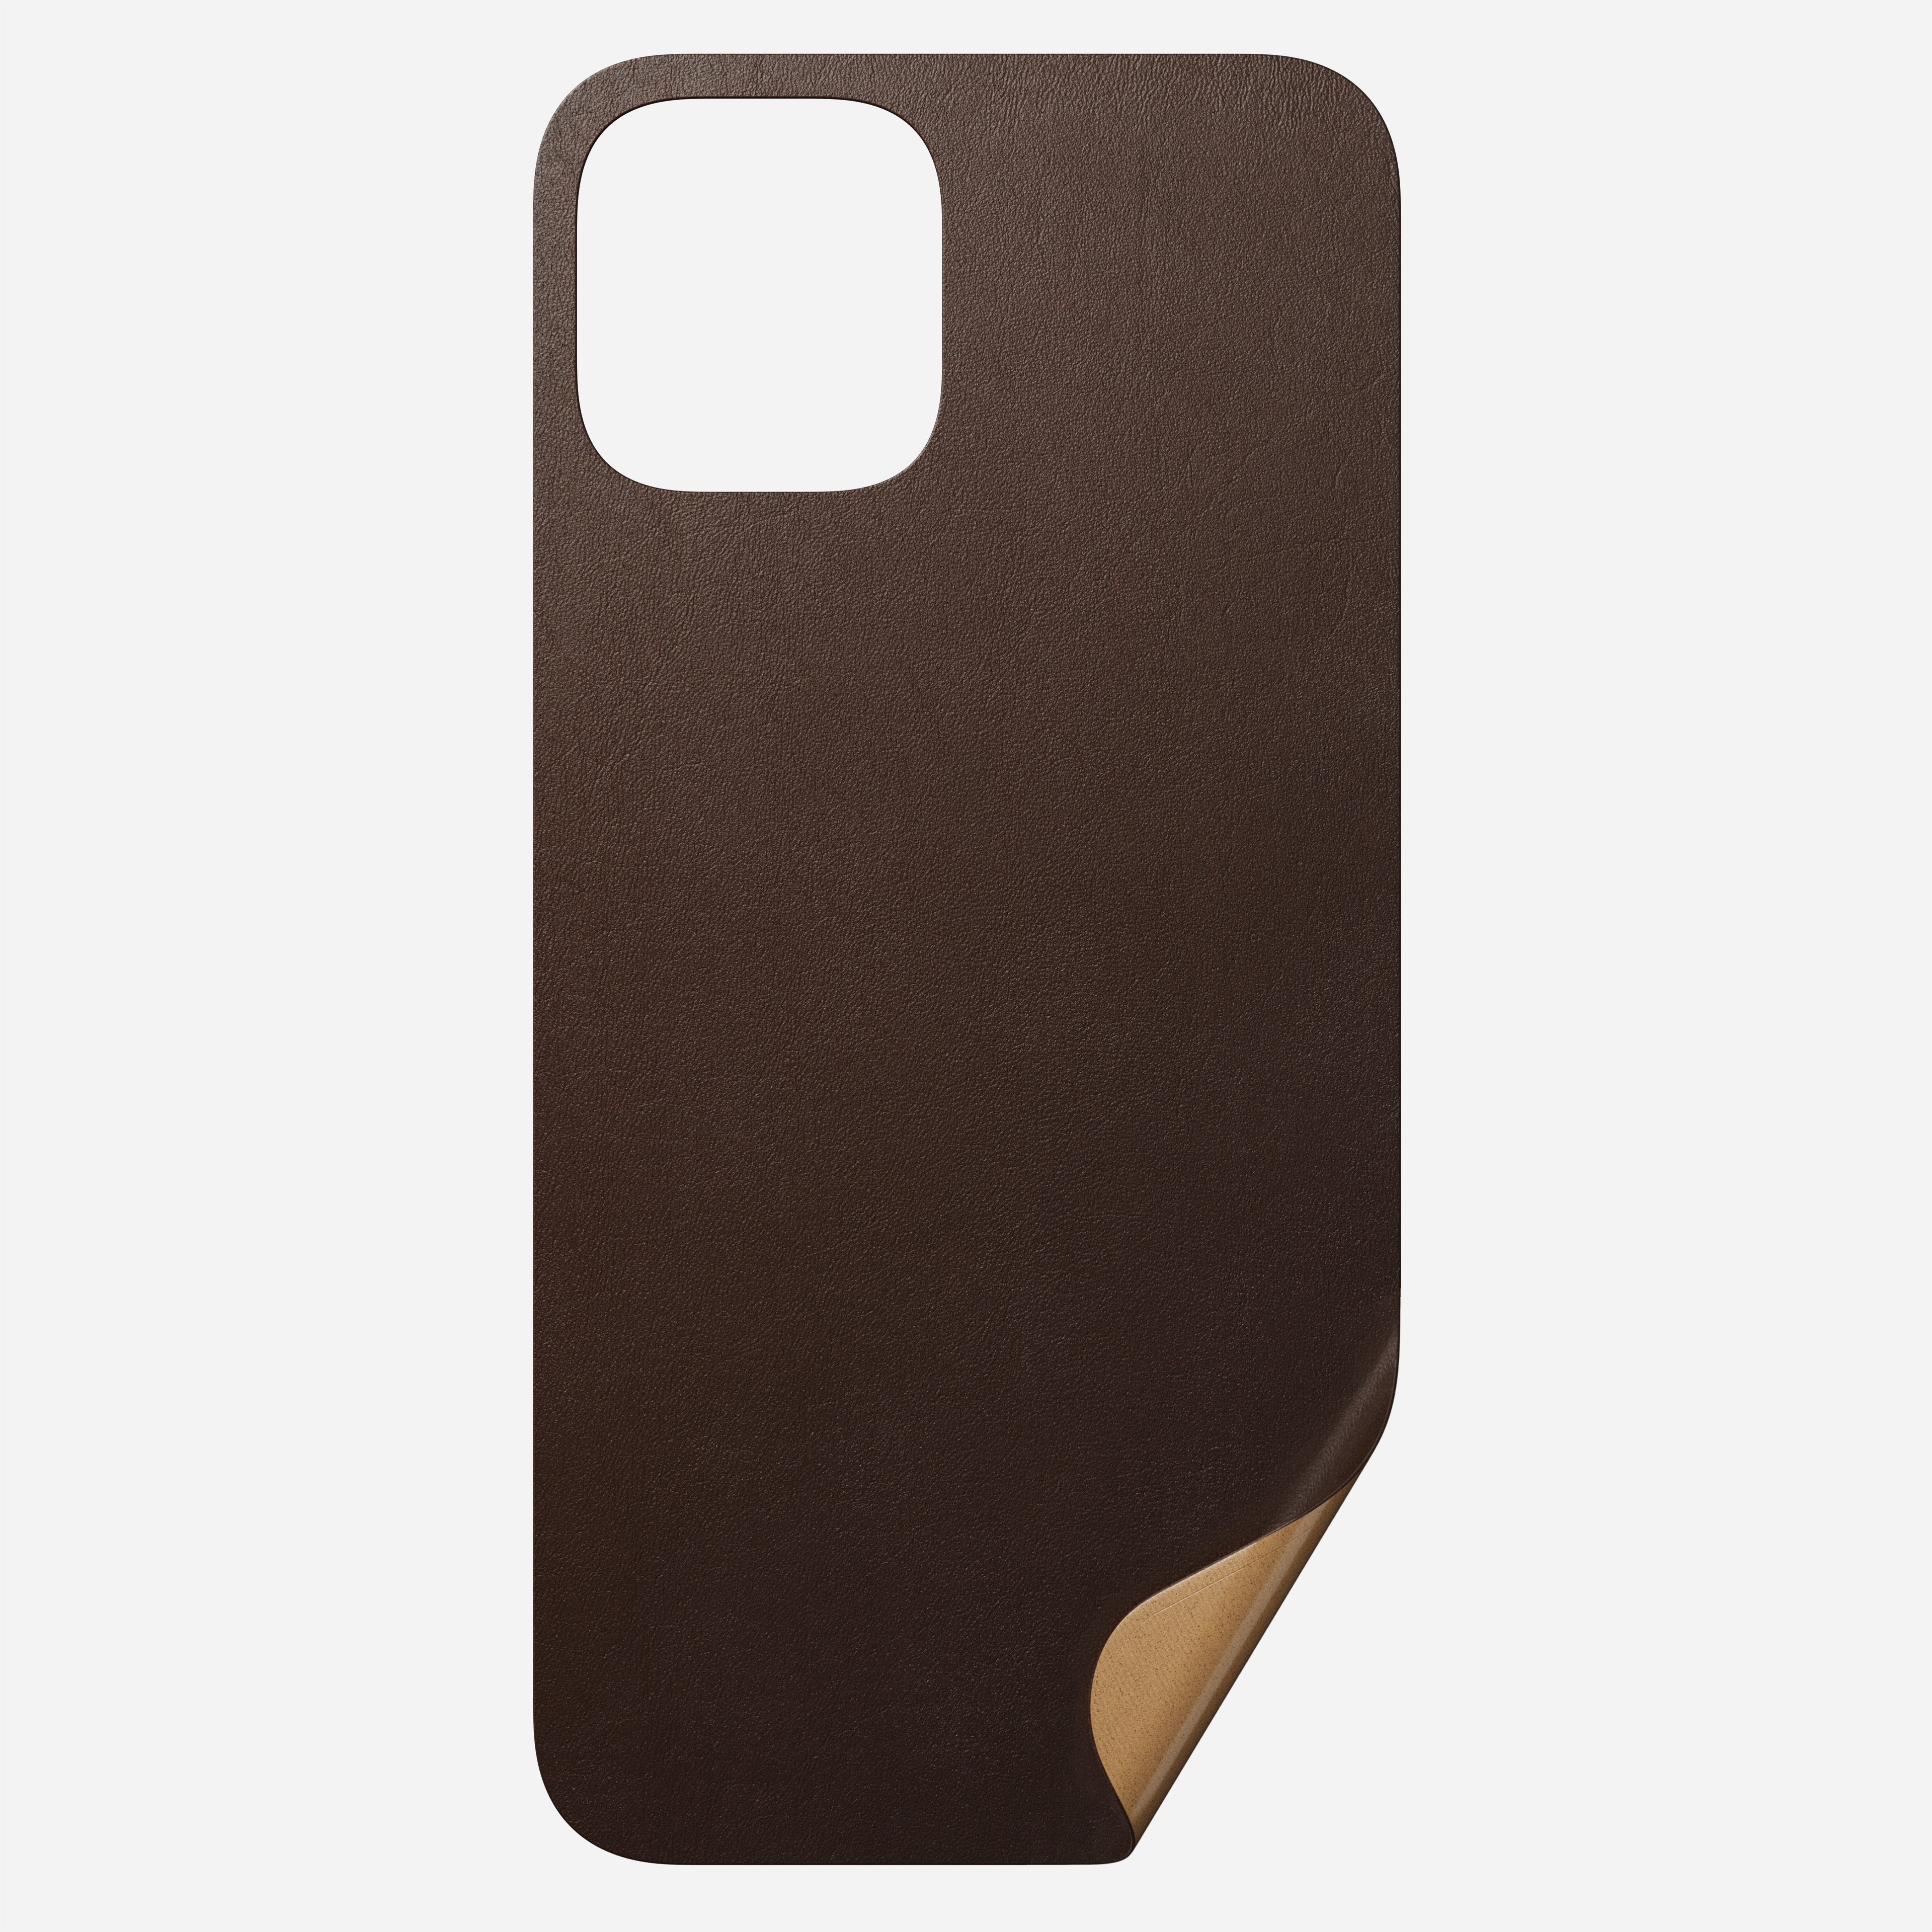 Leather iPhone Skin - iPhone 12 Pro Max - Rustic Brown | Horween ...